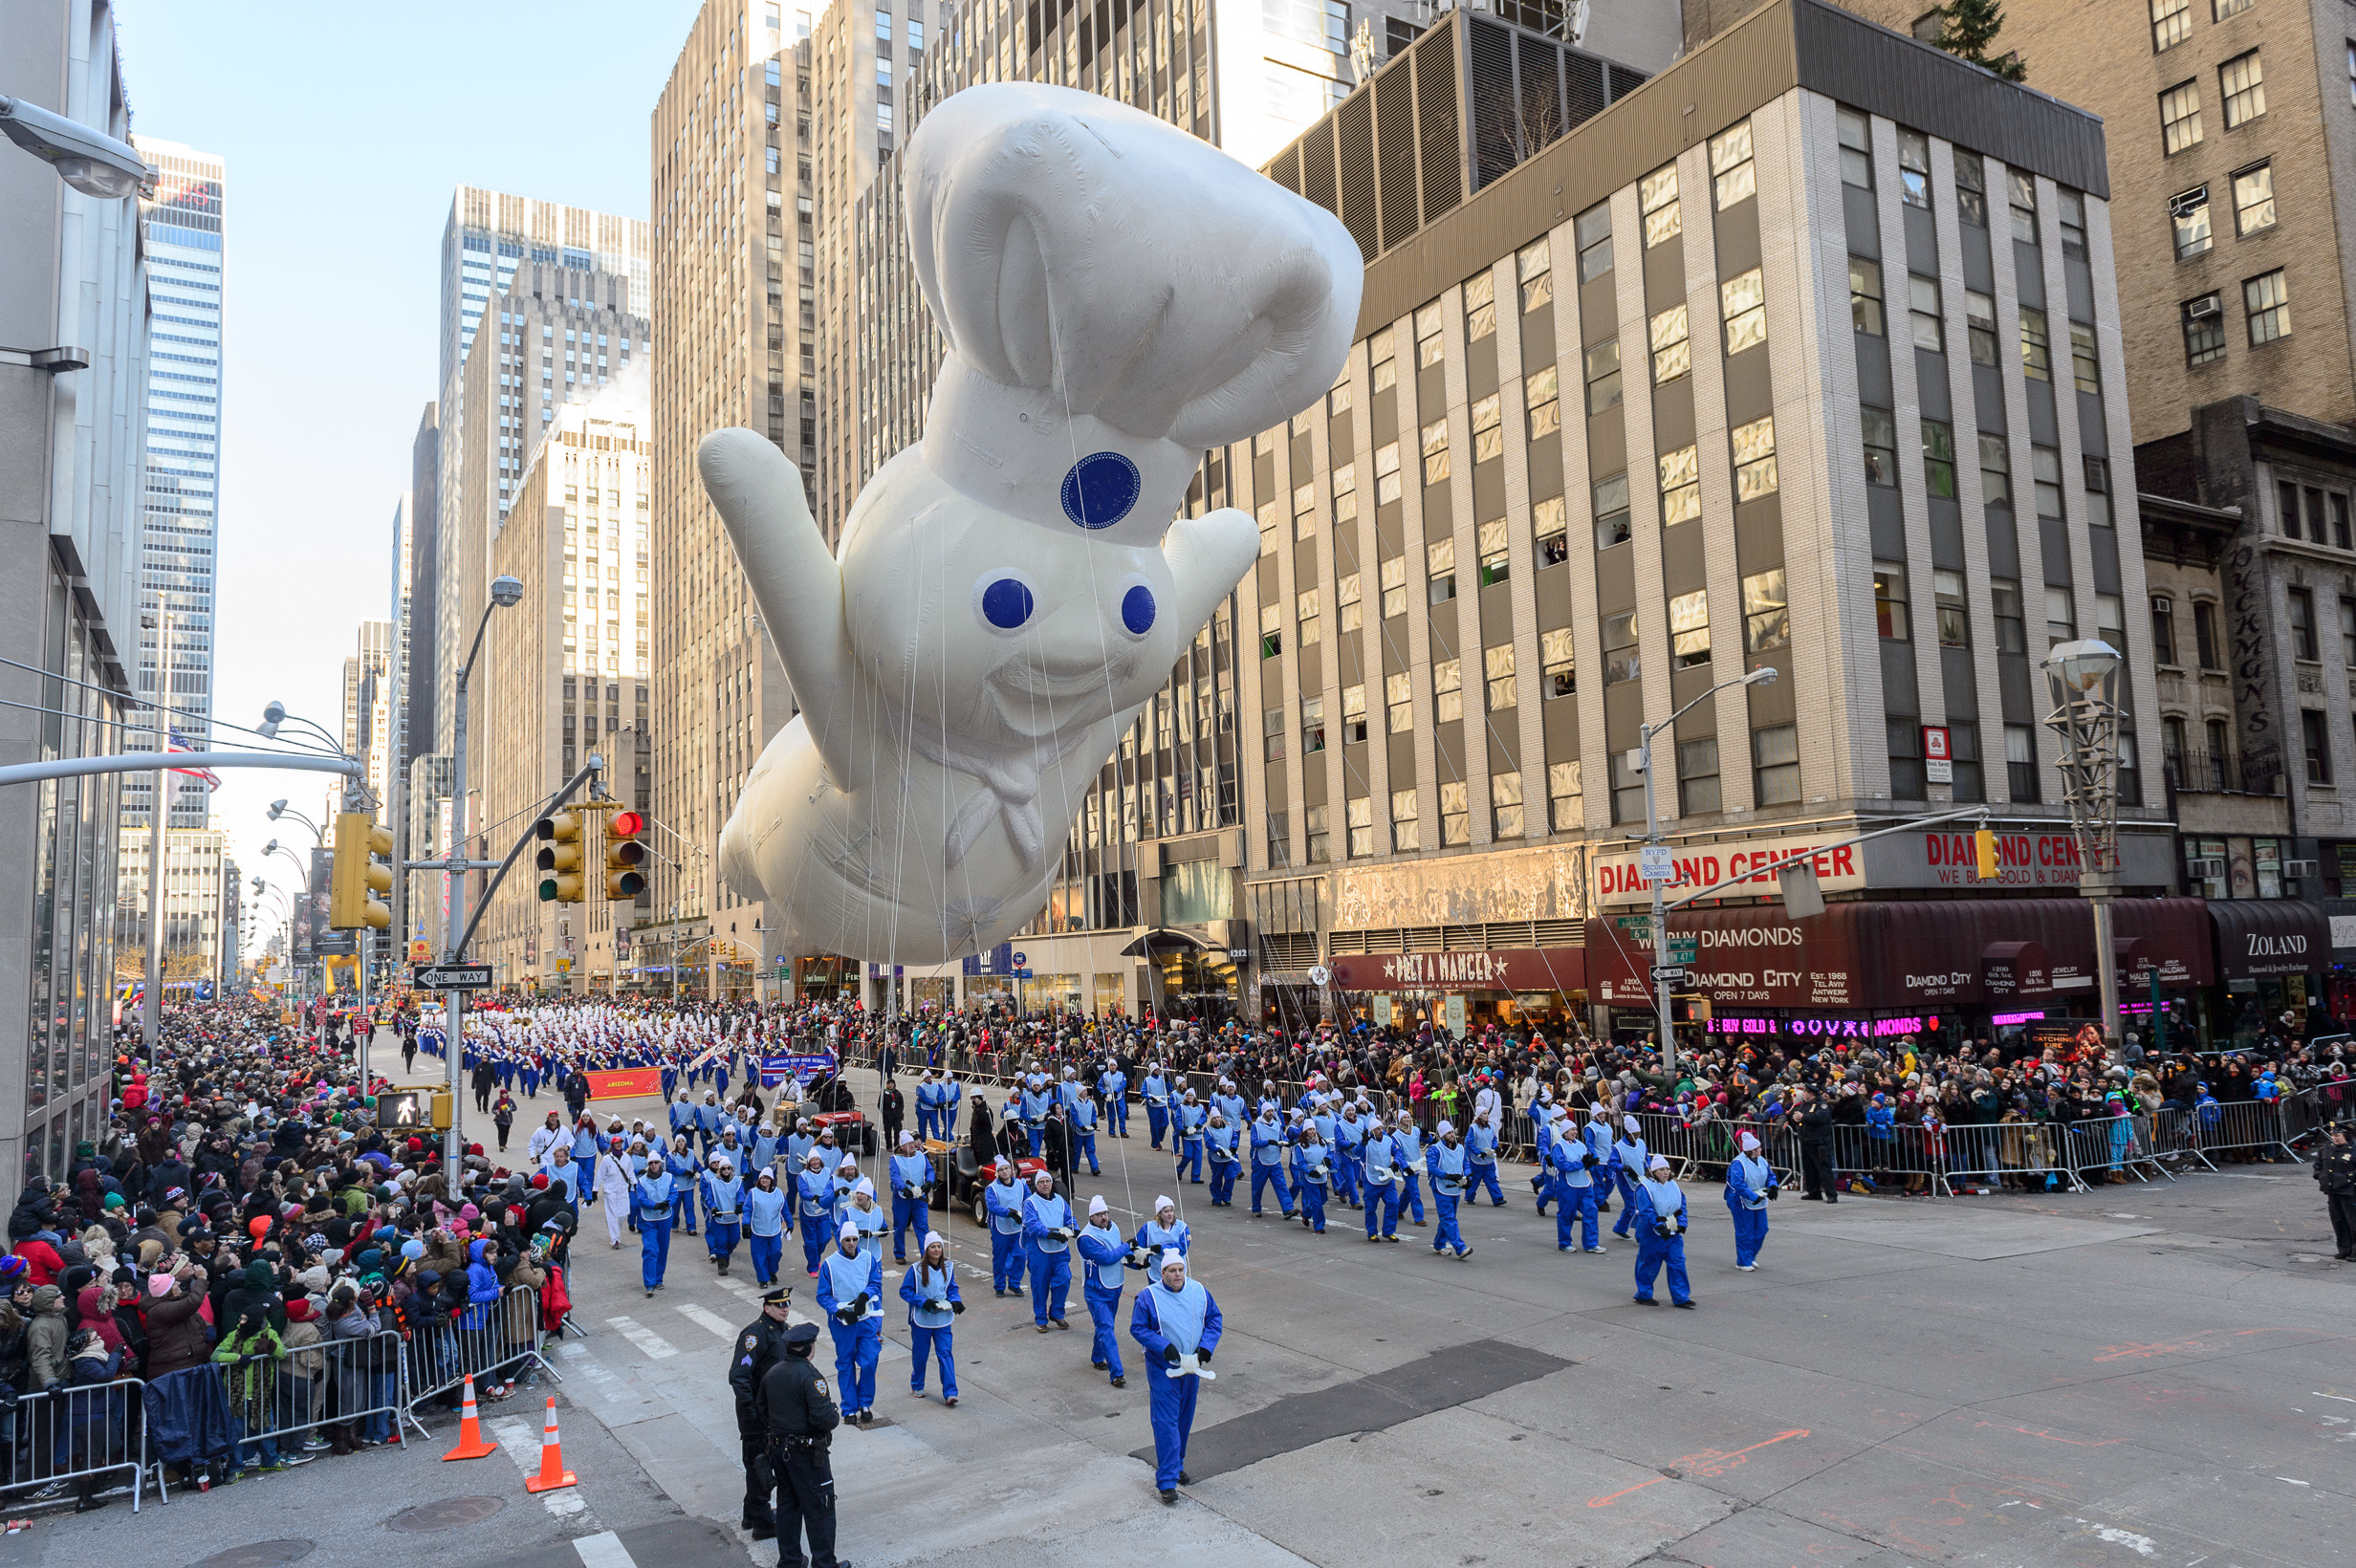 insider tips for this year's Macy's Thanksgiving Day Parade